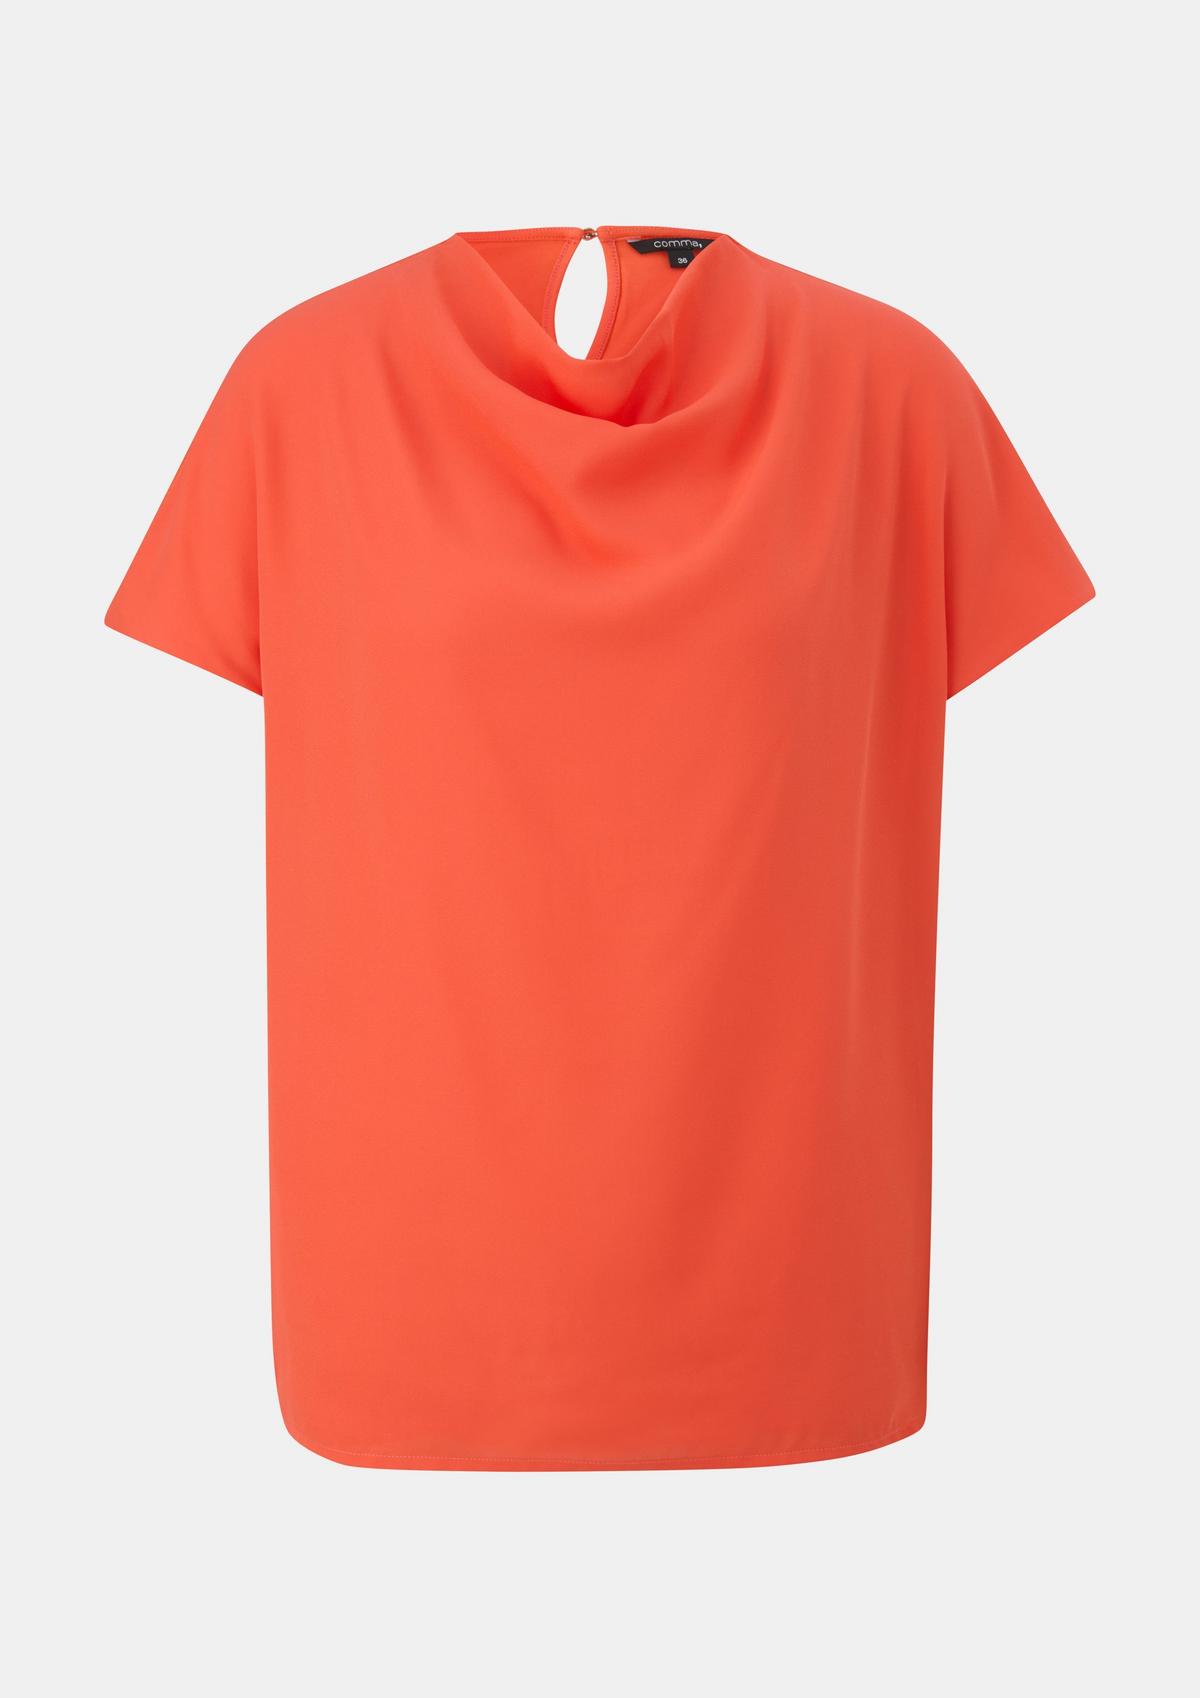 Shirts & Tops for Women Comma 